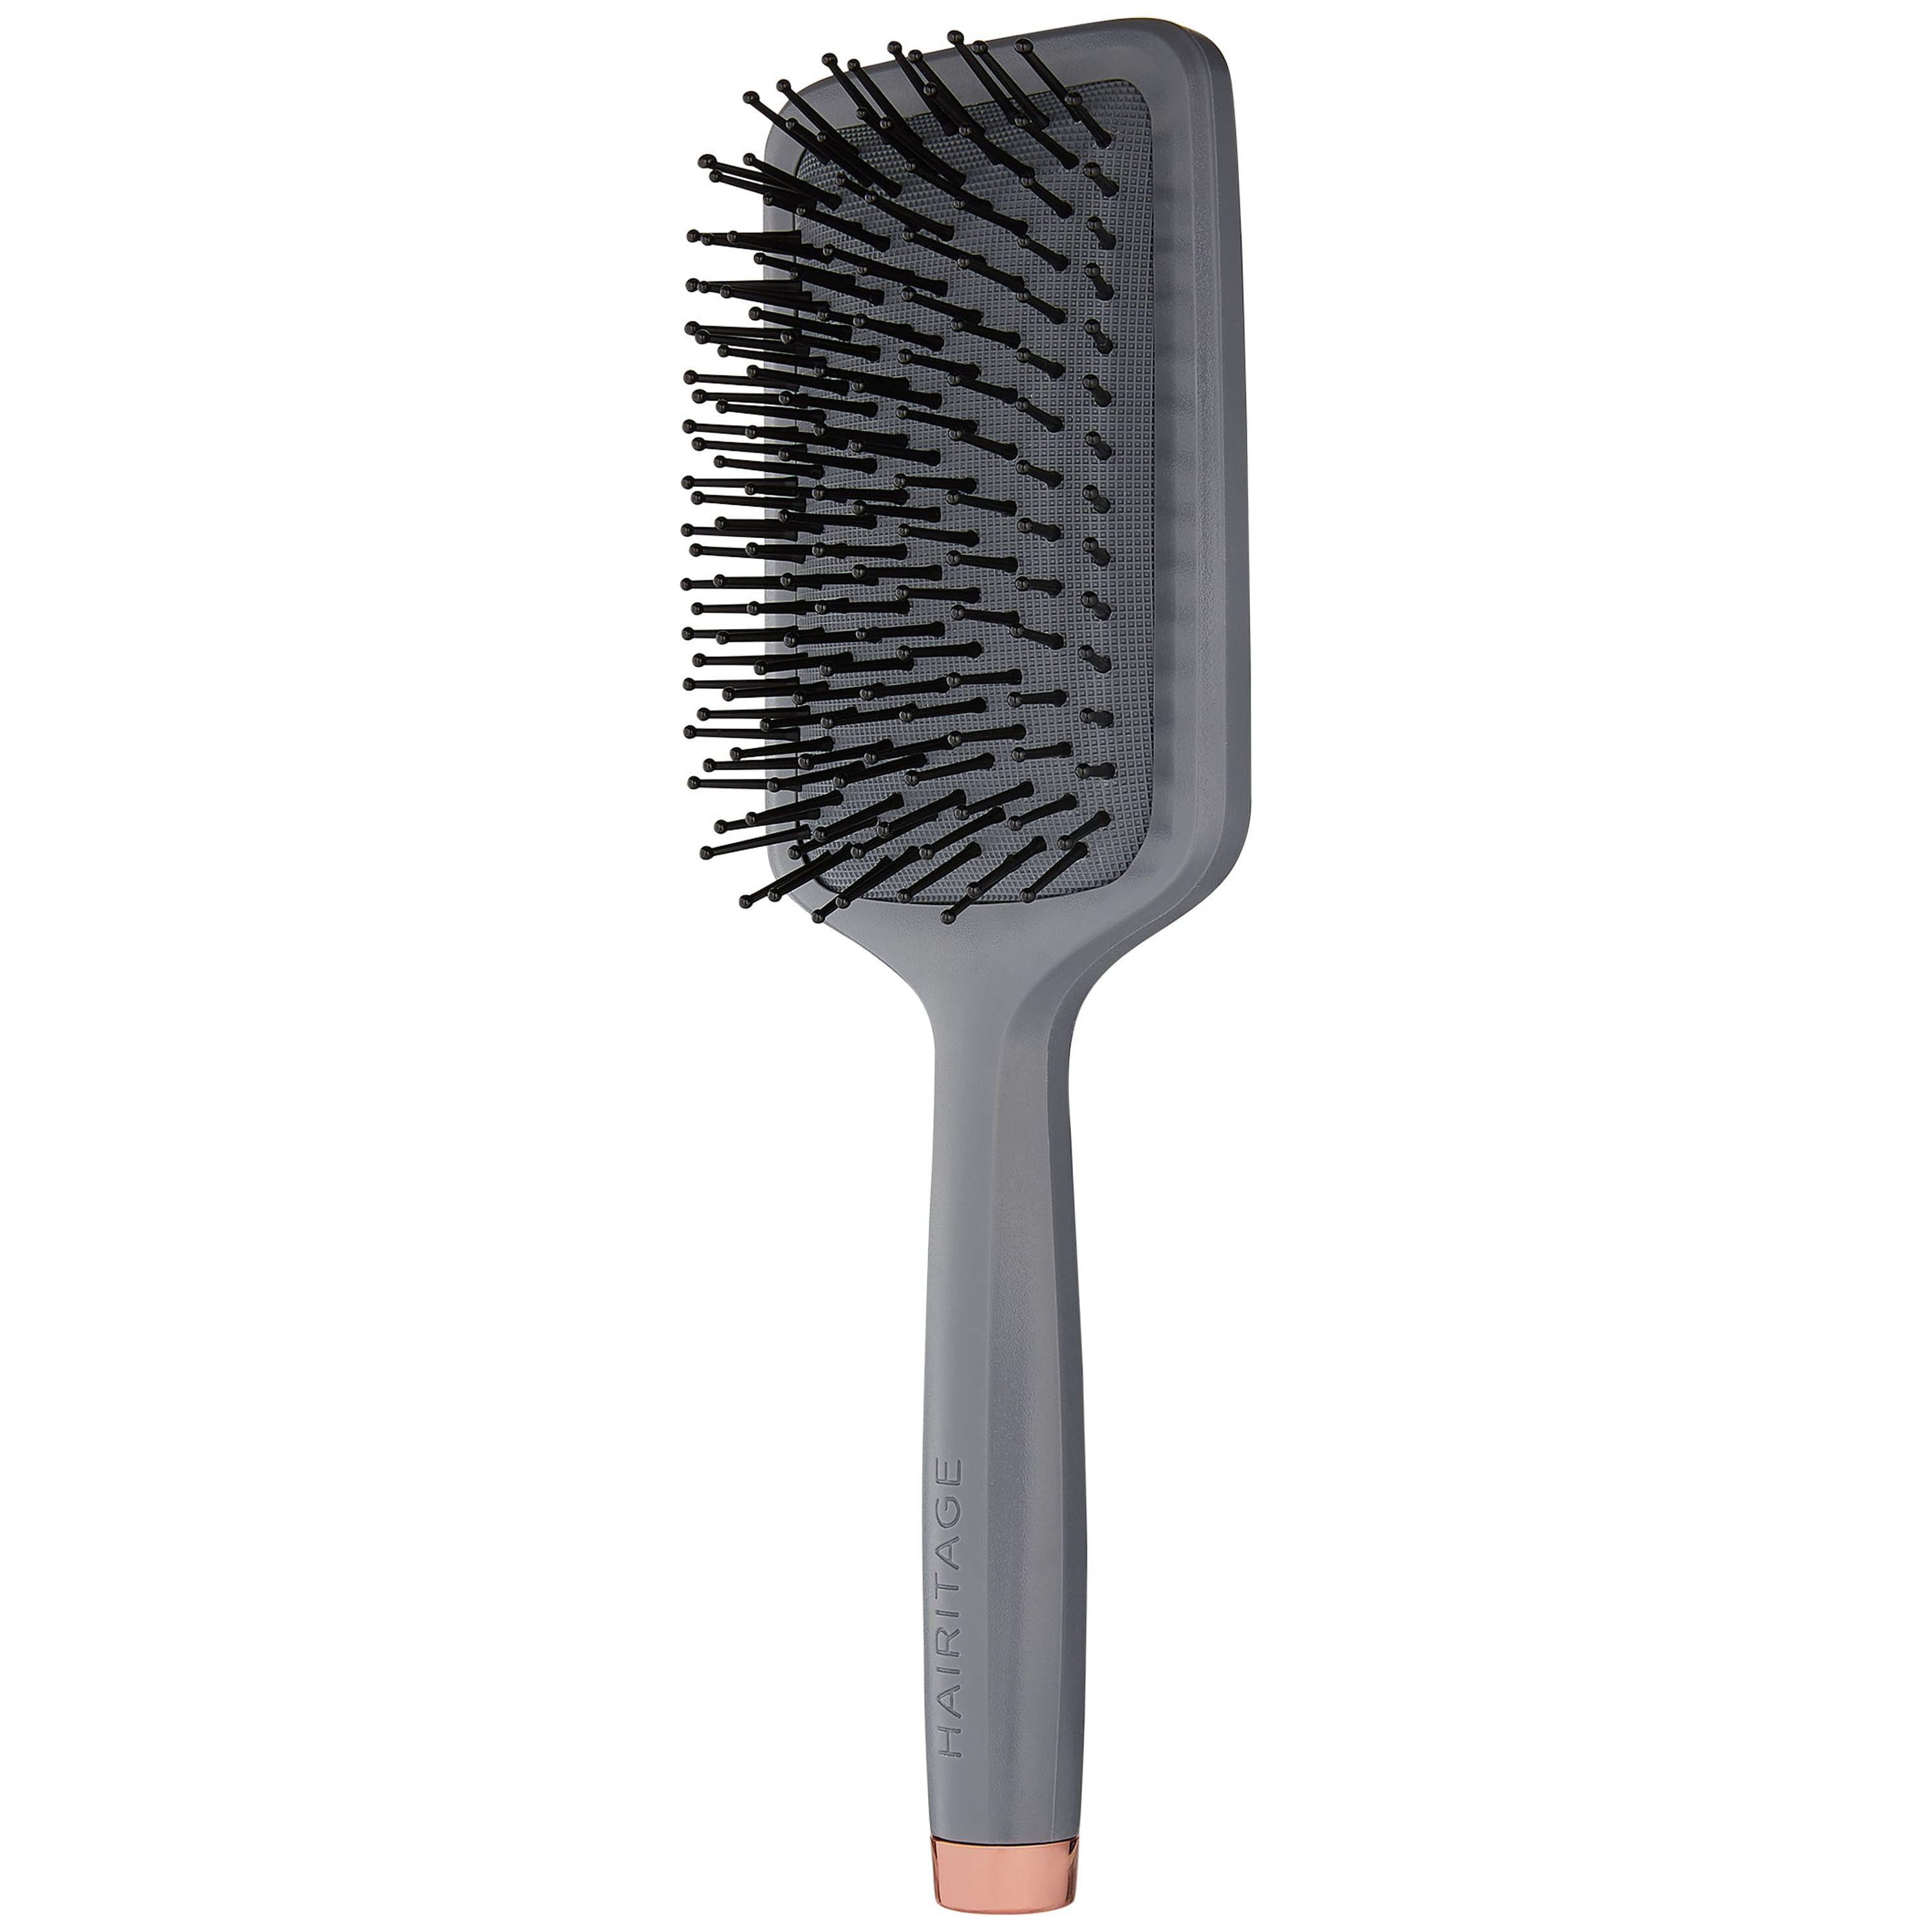 Hairitage Brush It Off Detangling & Smoothing Paddle Hair Brush for Women | Anti Frizz | for Wet & Dry Hair, 1 PC - image 3 of 12